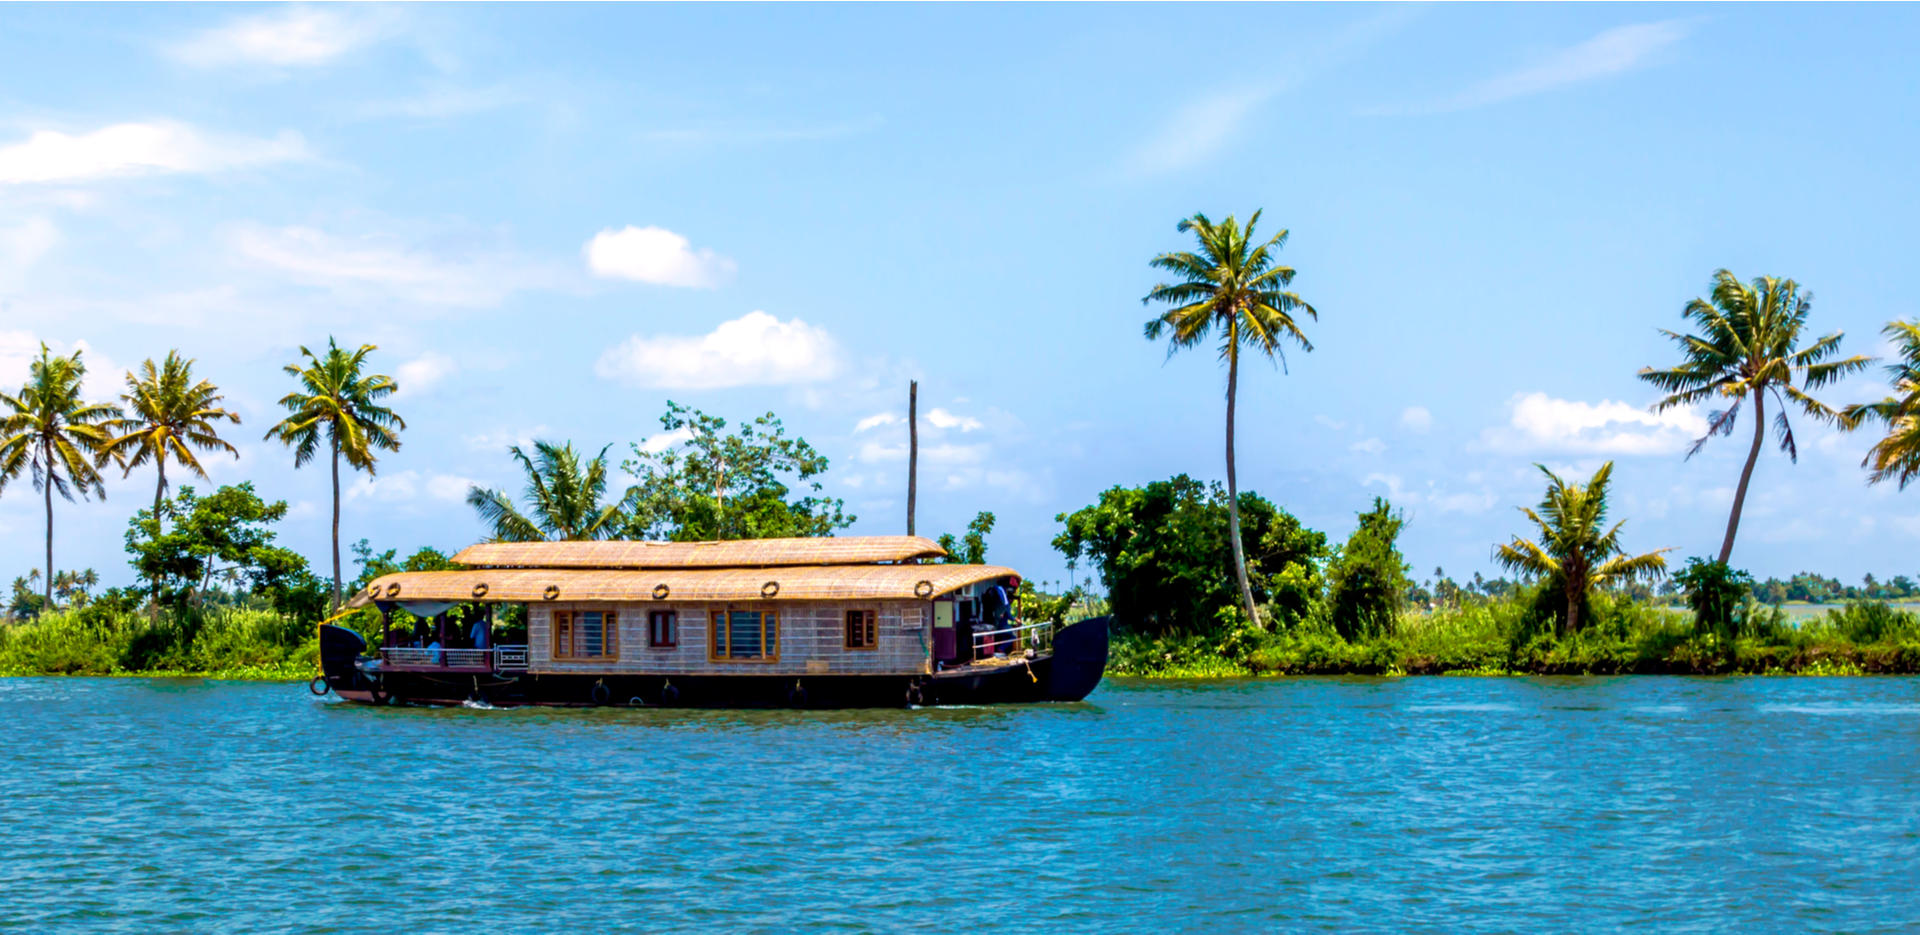 Things to Do in Alleppey